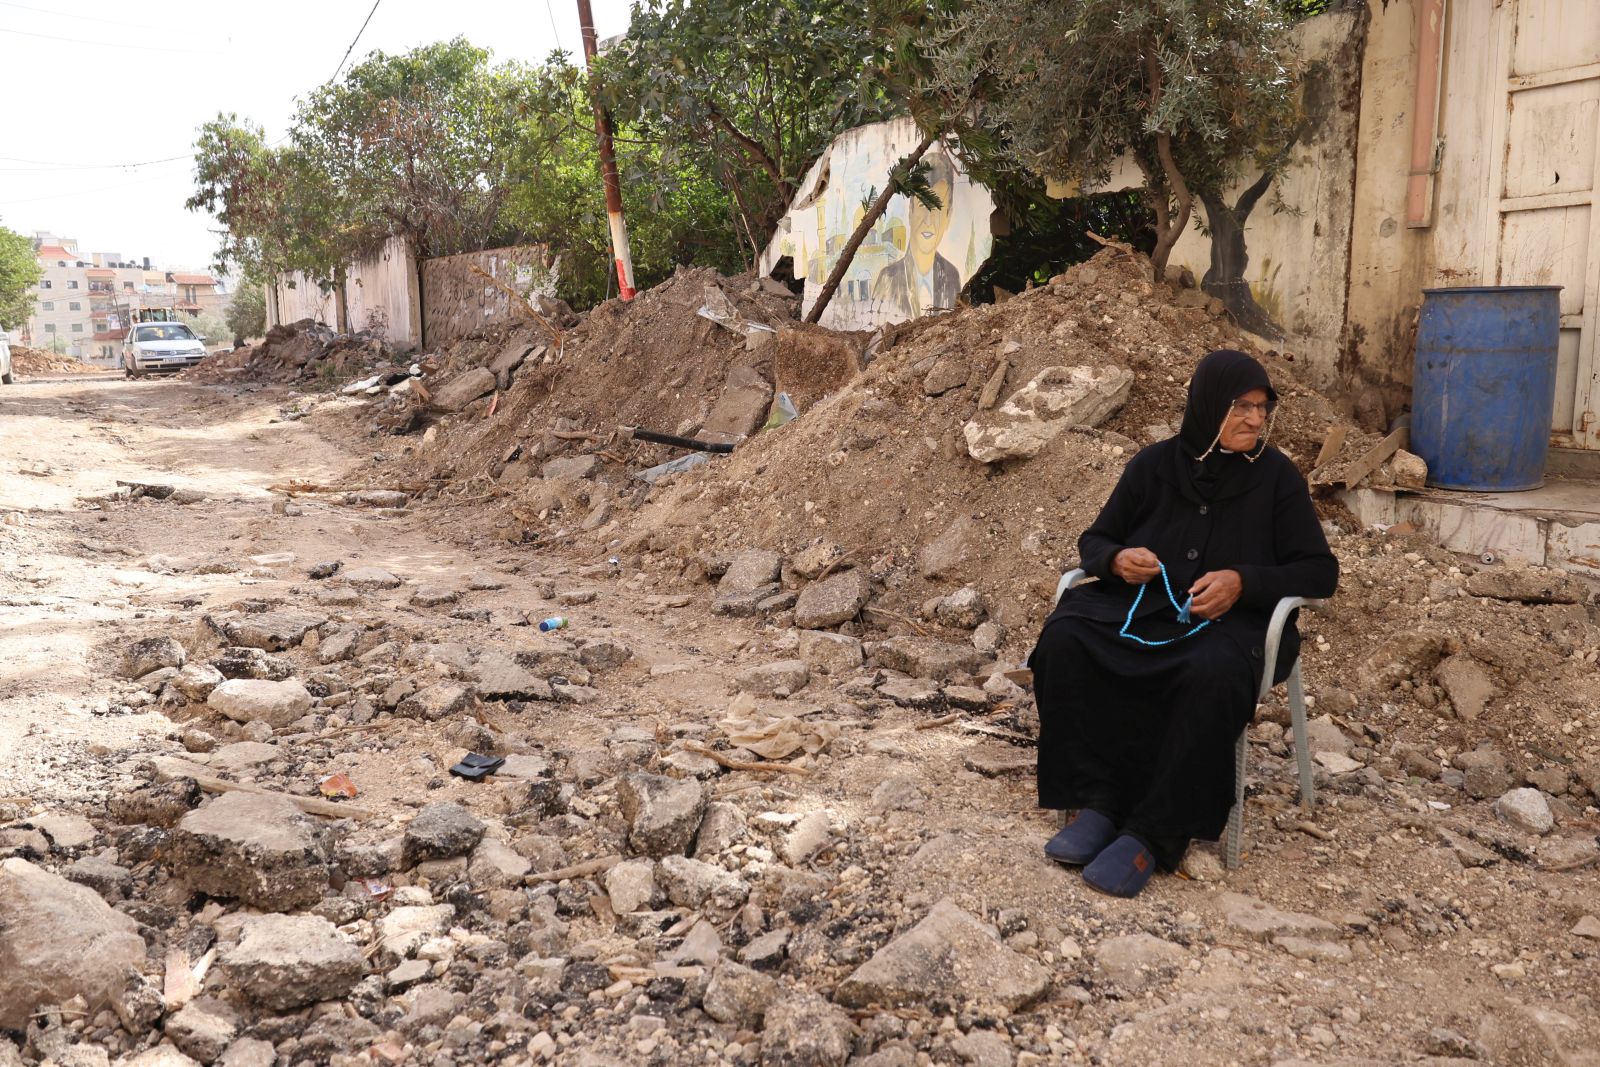 epa10996009 People woman sits amidst the rubble in a street after an Israeli raid on the Jenin refugee camp in the West Bank city of Jenin, 26 November 2023. According to the Palestinian Health Ministry, five Palestinians were killed and 15 others injured in the overnight Israeli raid on the Jenin camp and ensuing clashes.  EPA/ALAA BADARNEH